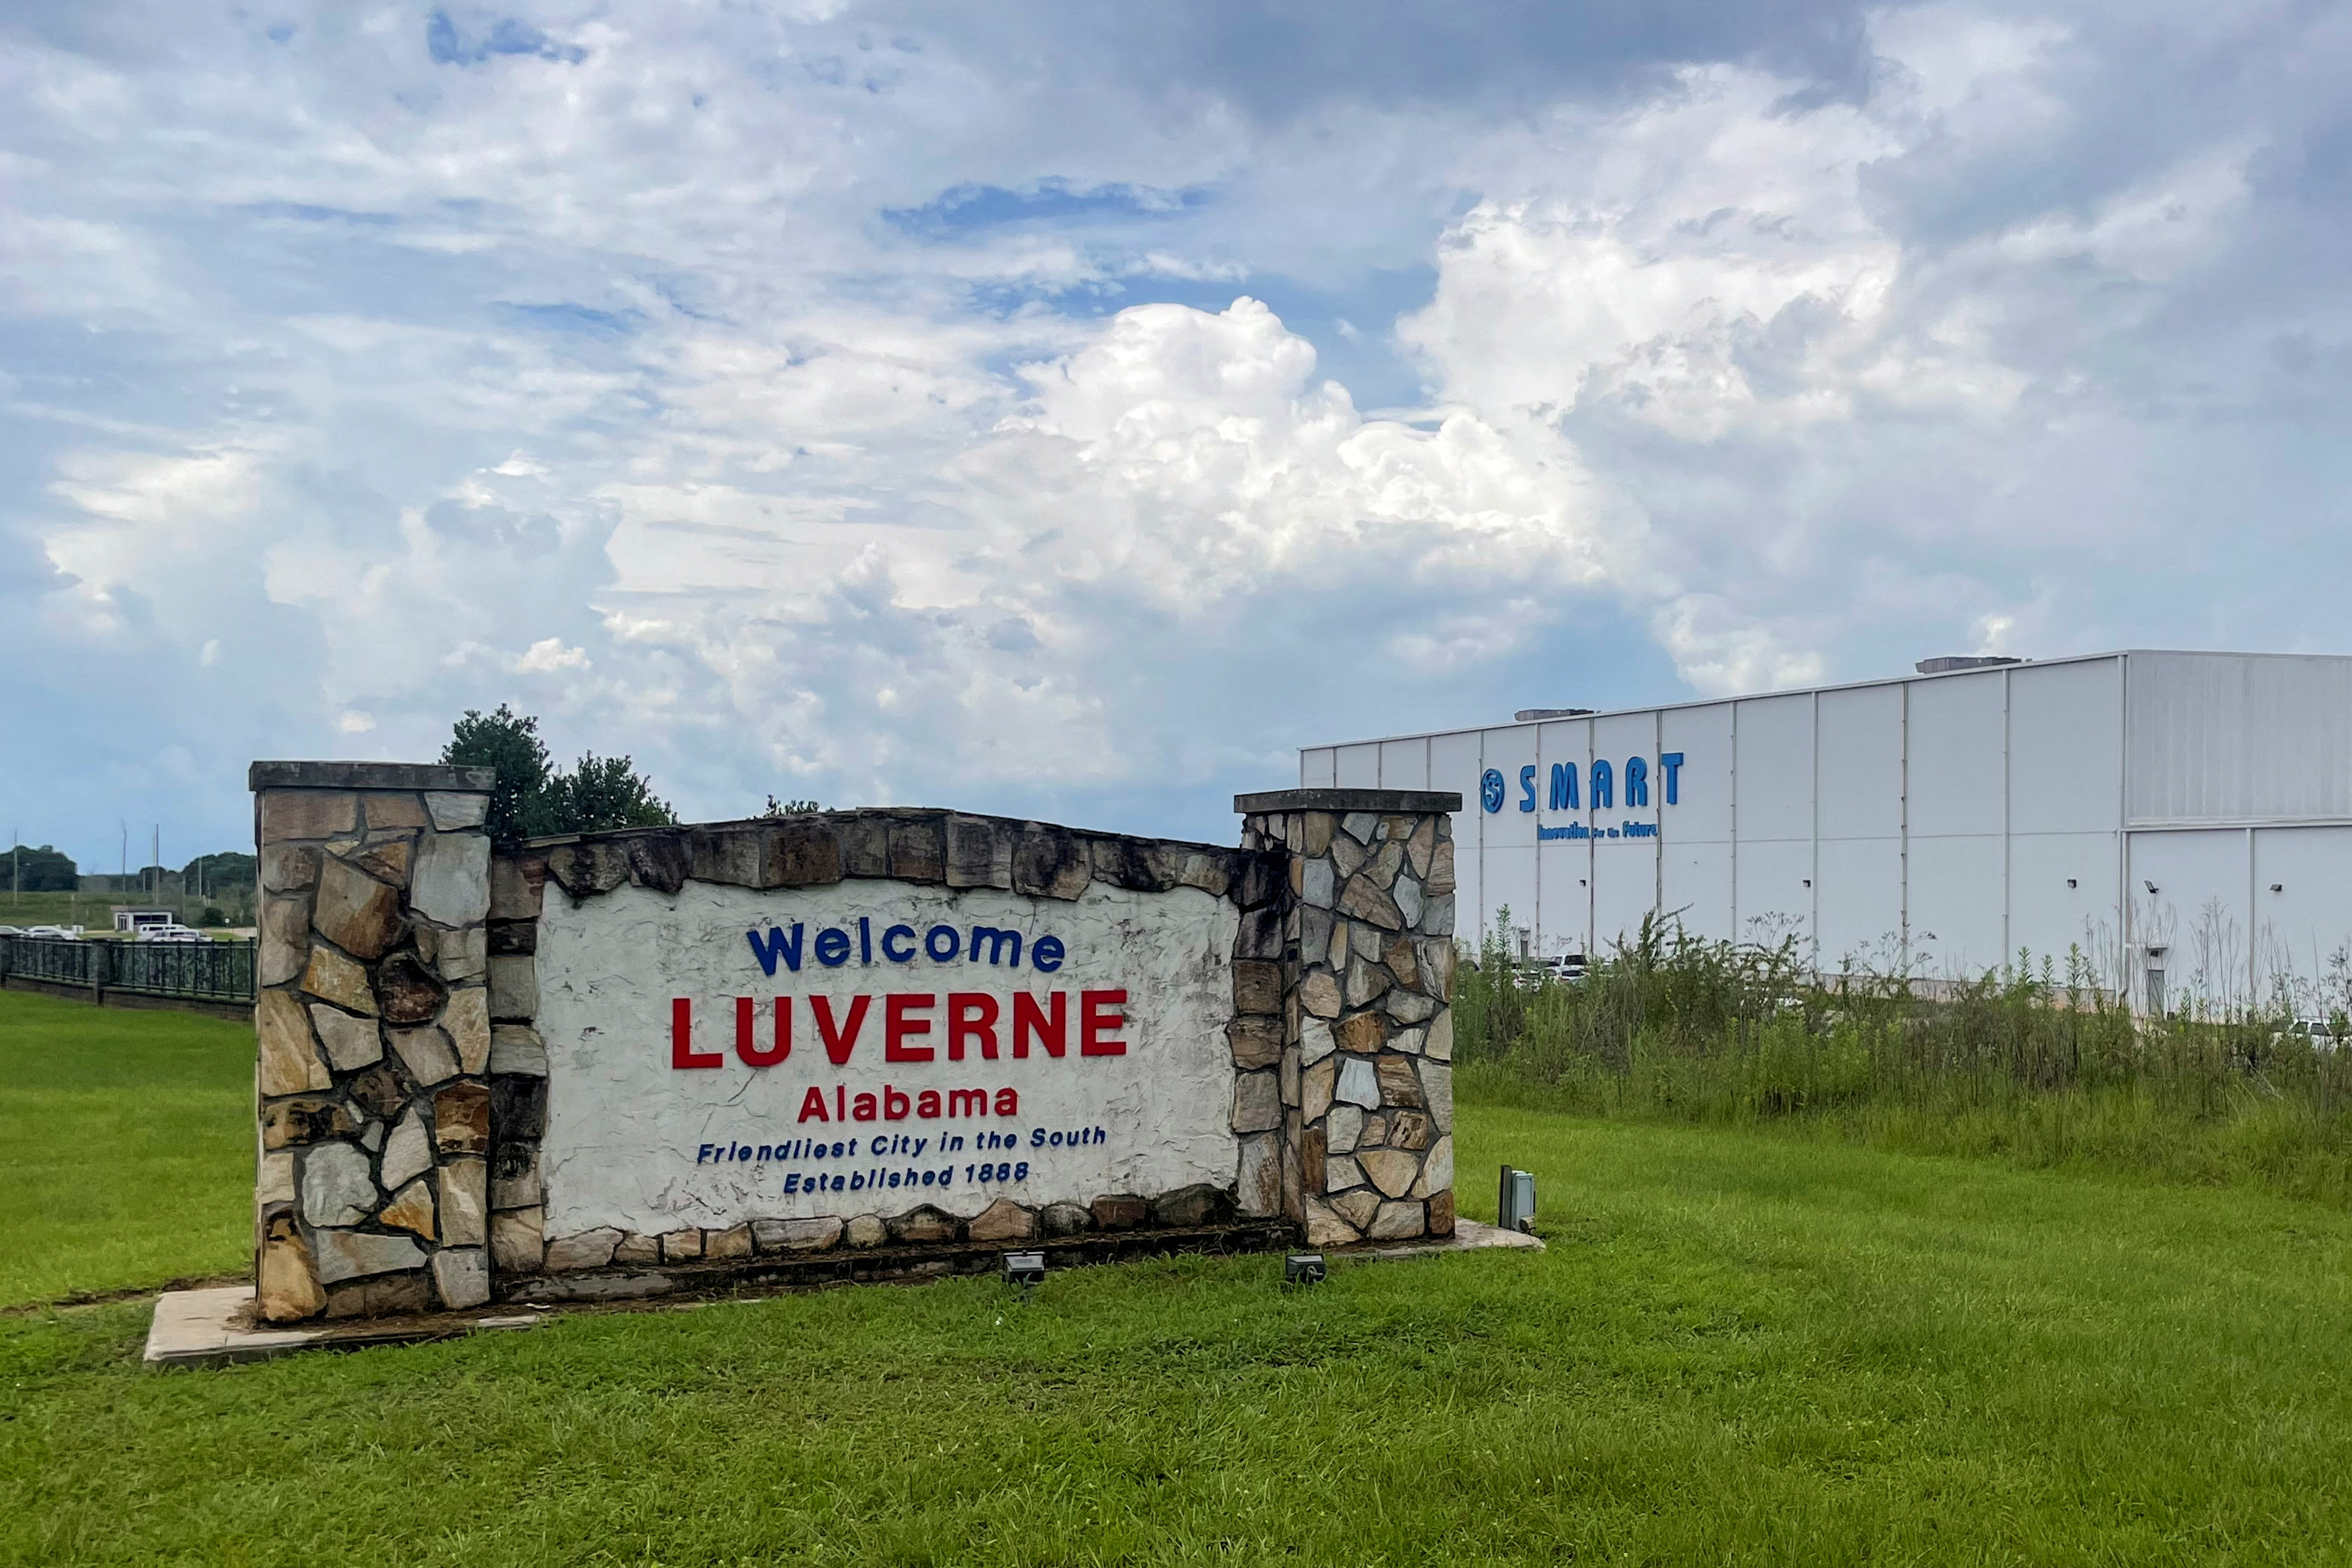 A welcome sign stands next to the SMART Alabama, LLC auto parts plant in Luverne